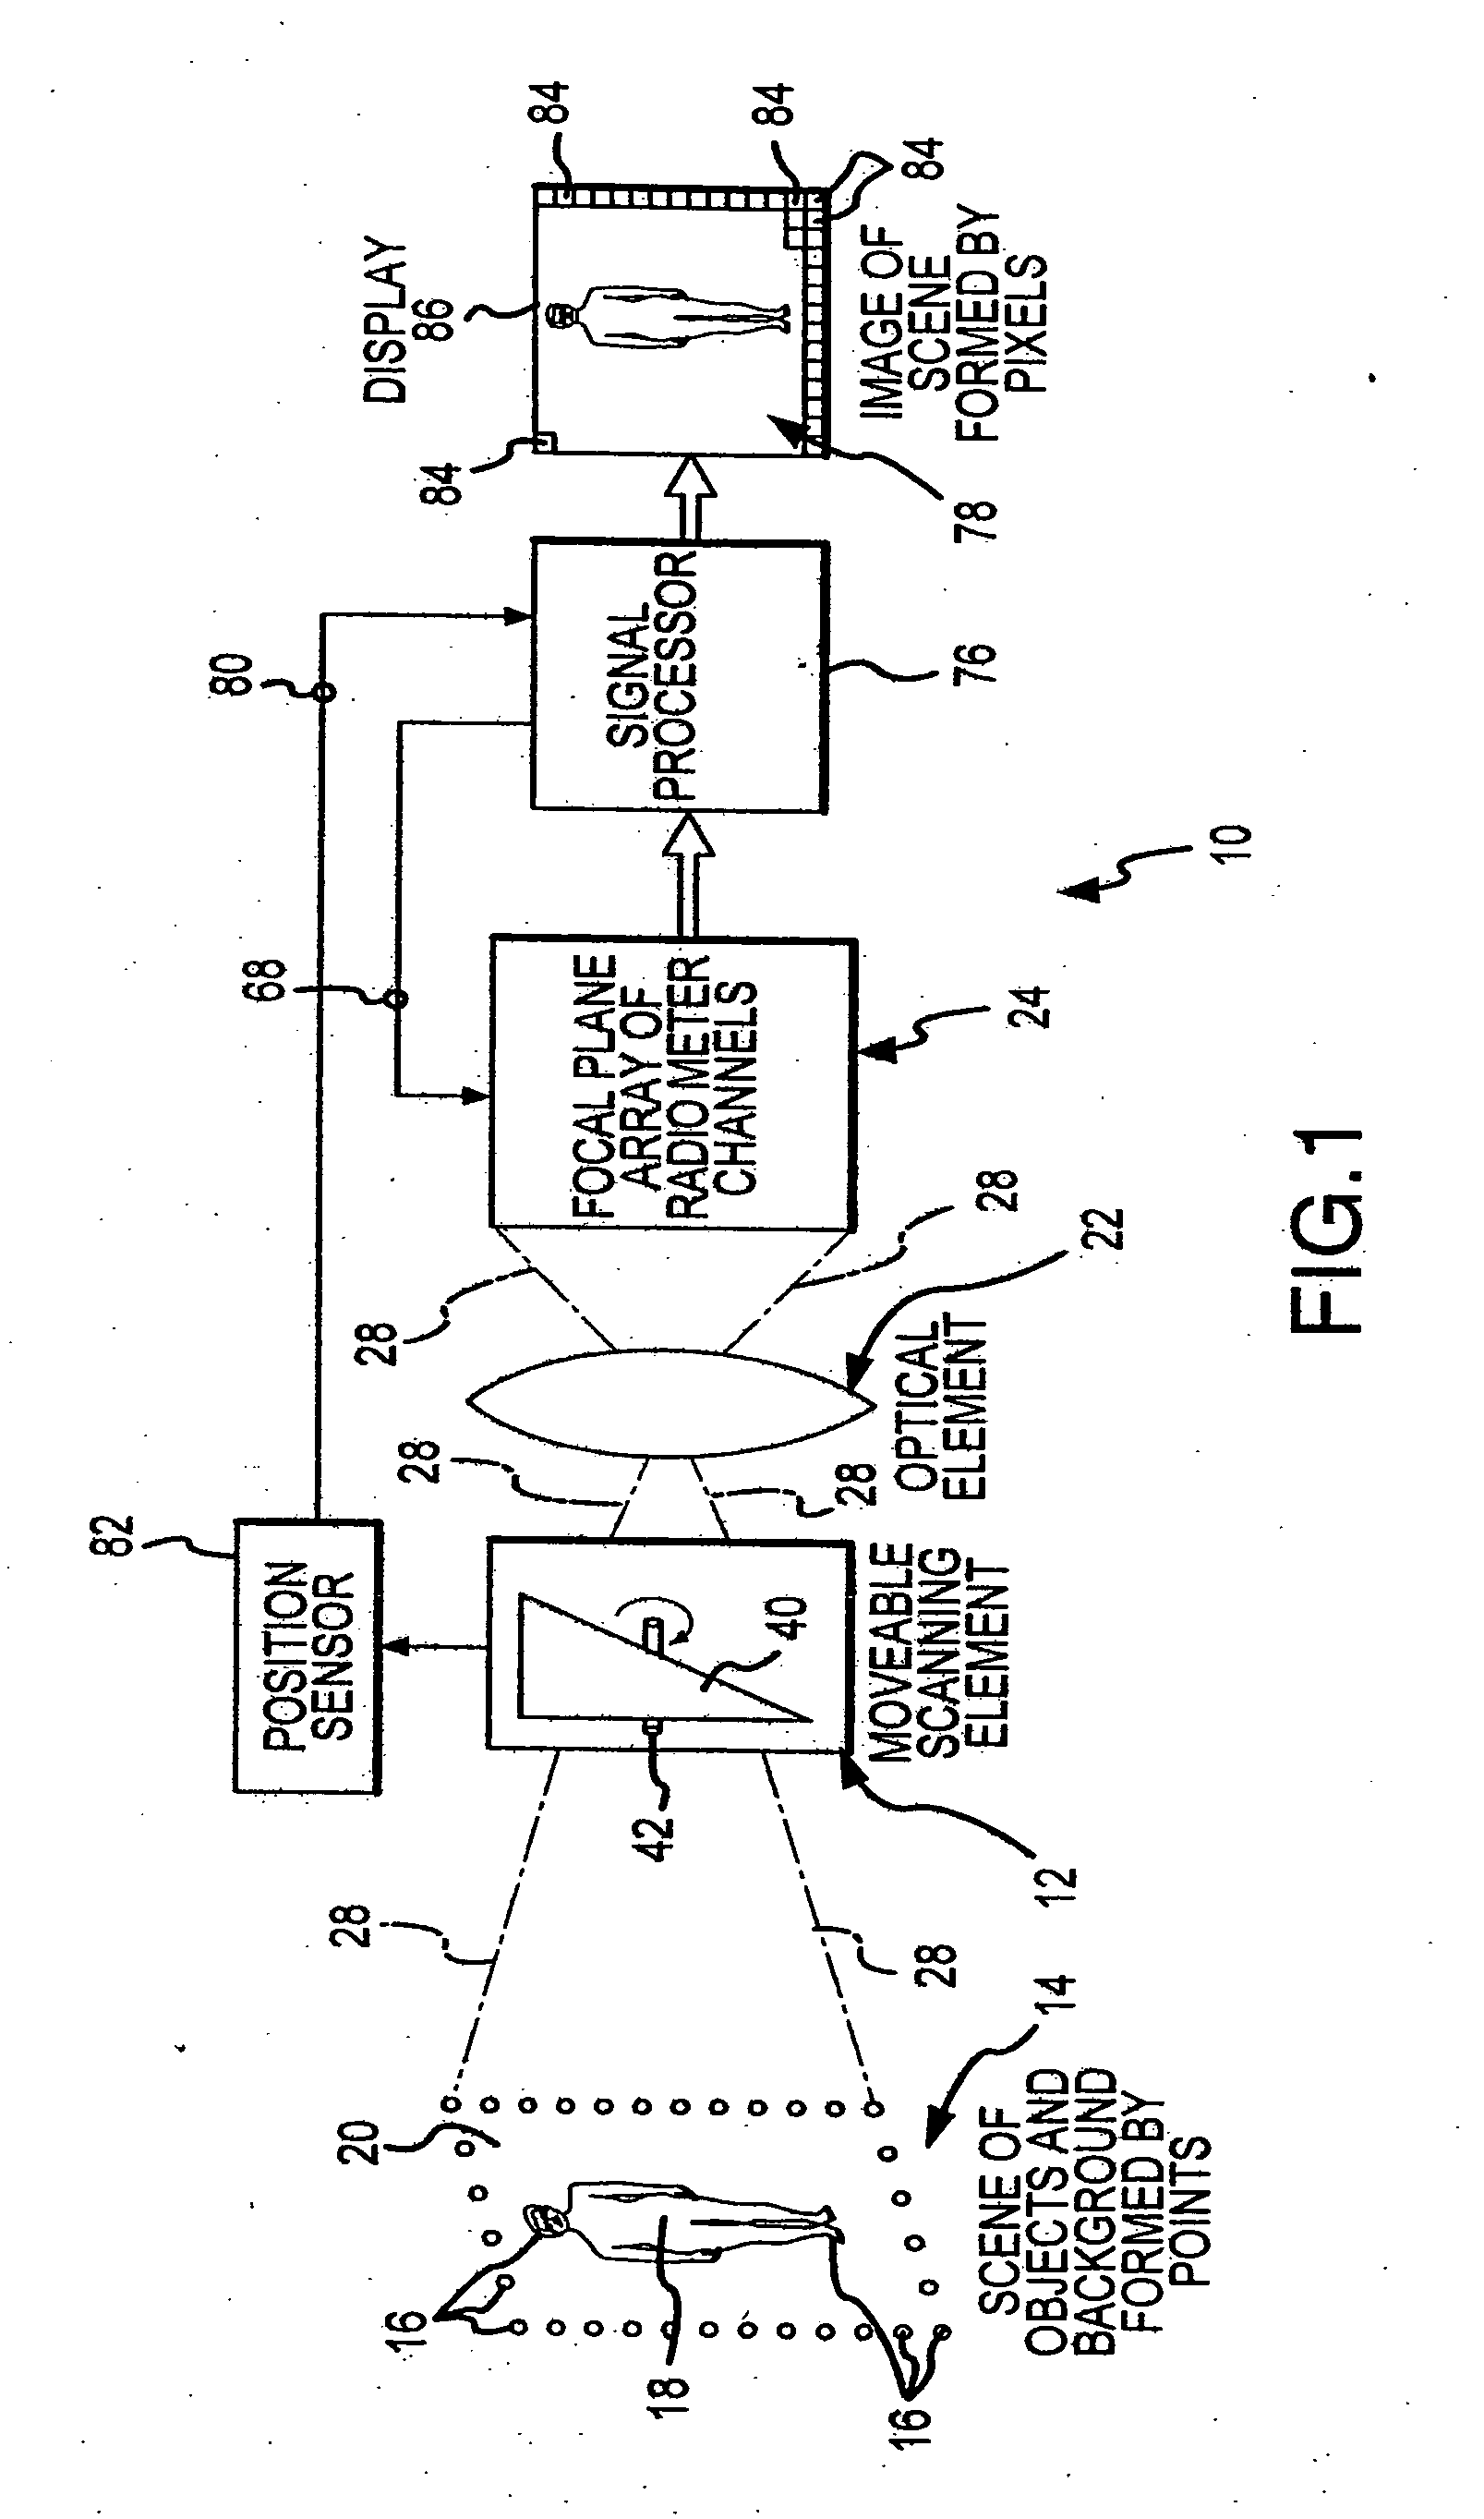 Offset drift compensating flat fielding method and camera used in millimeter wave imaging